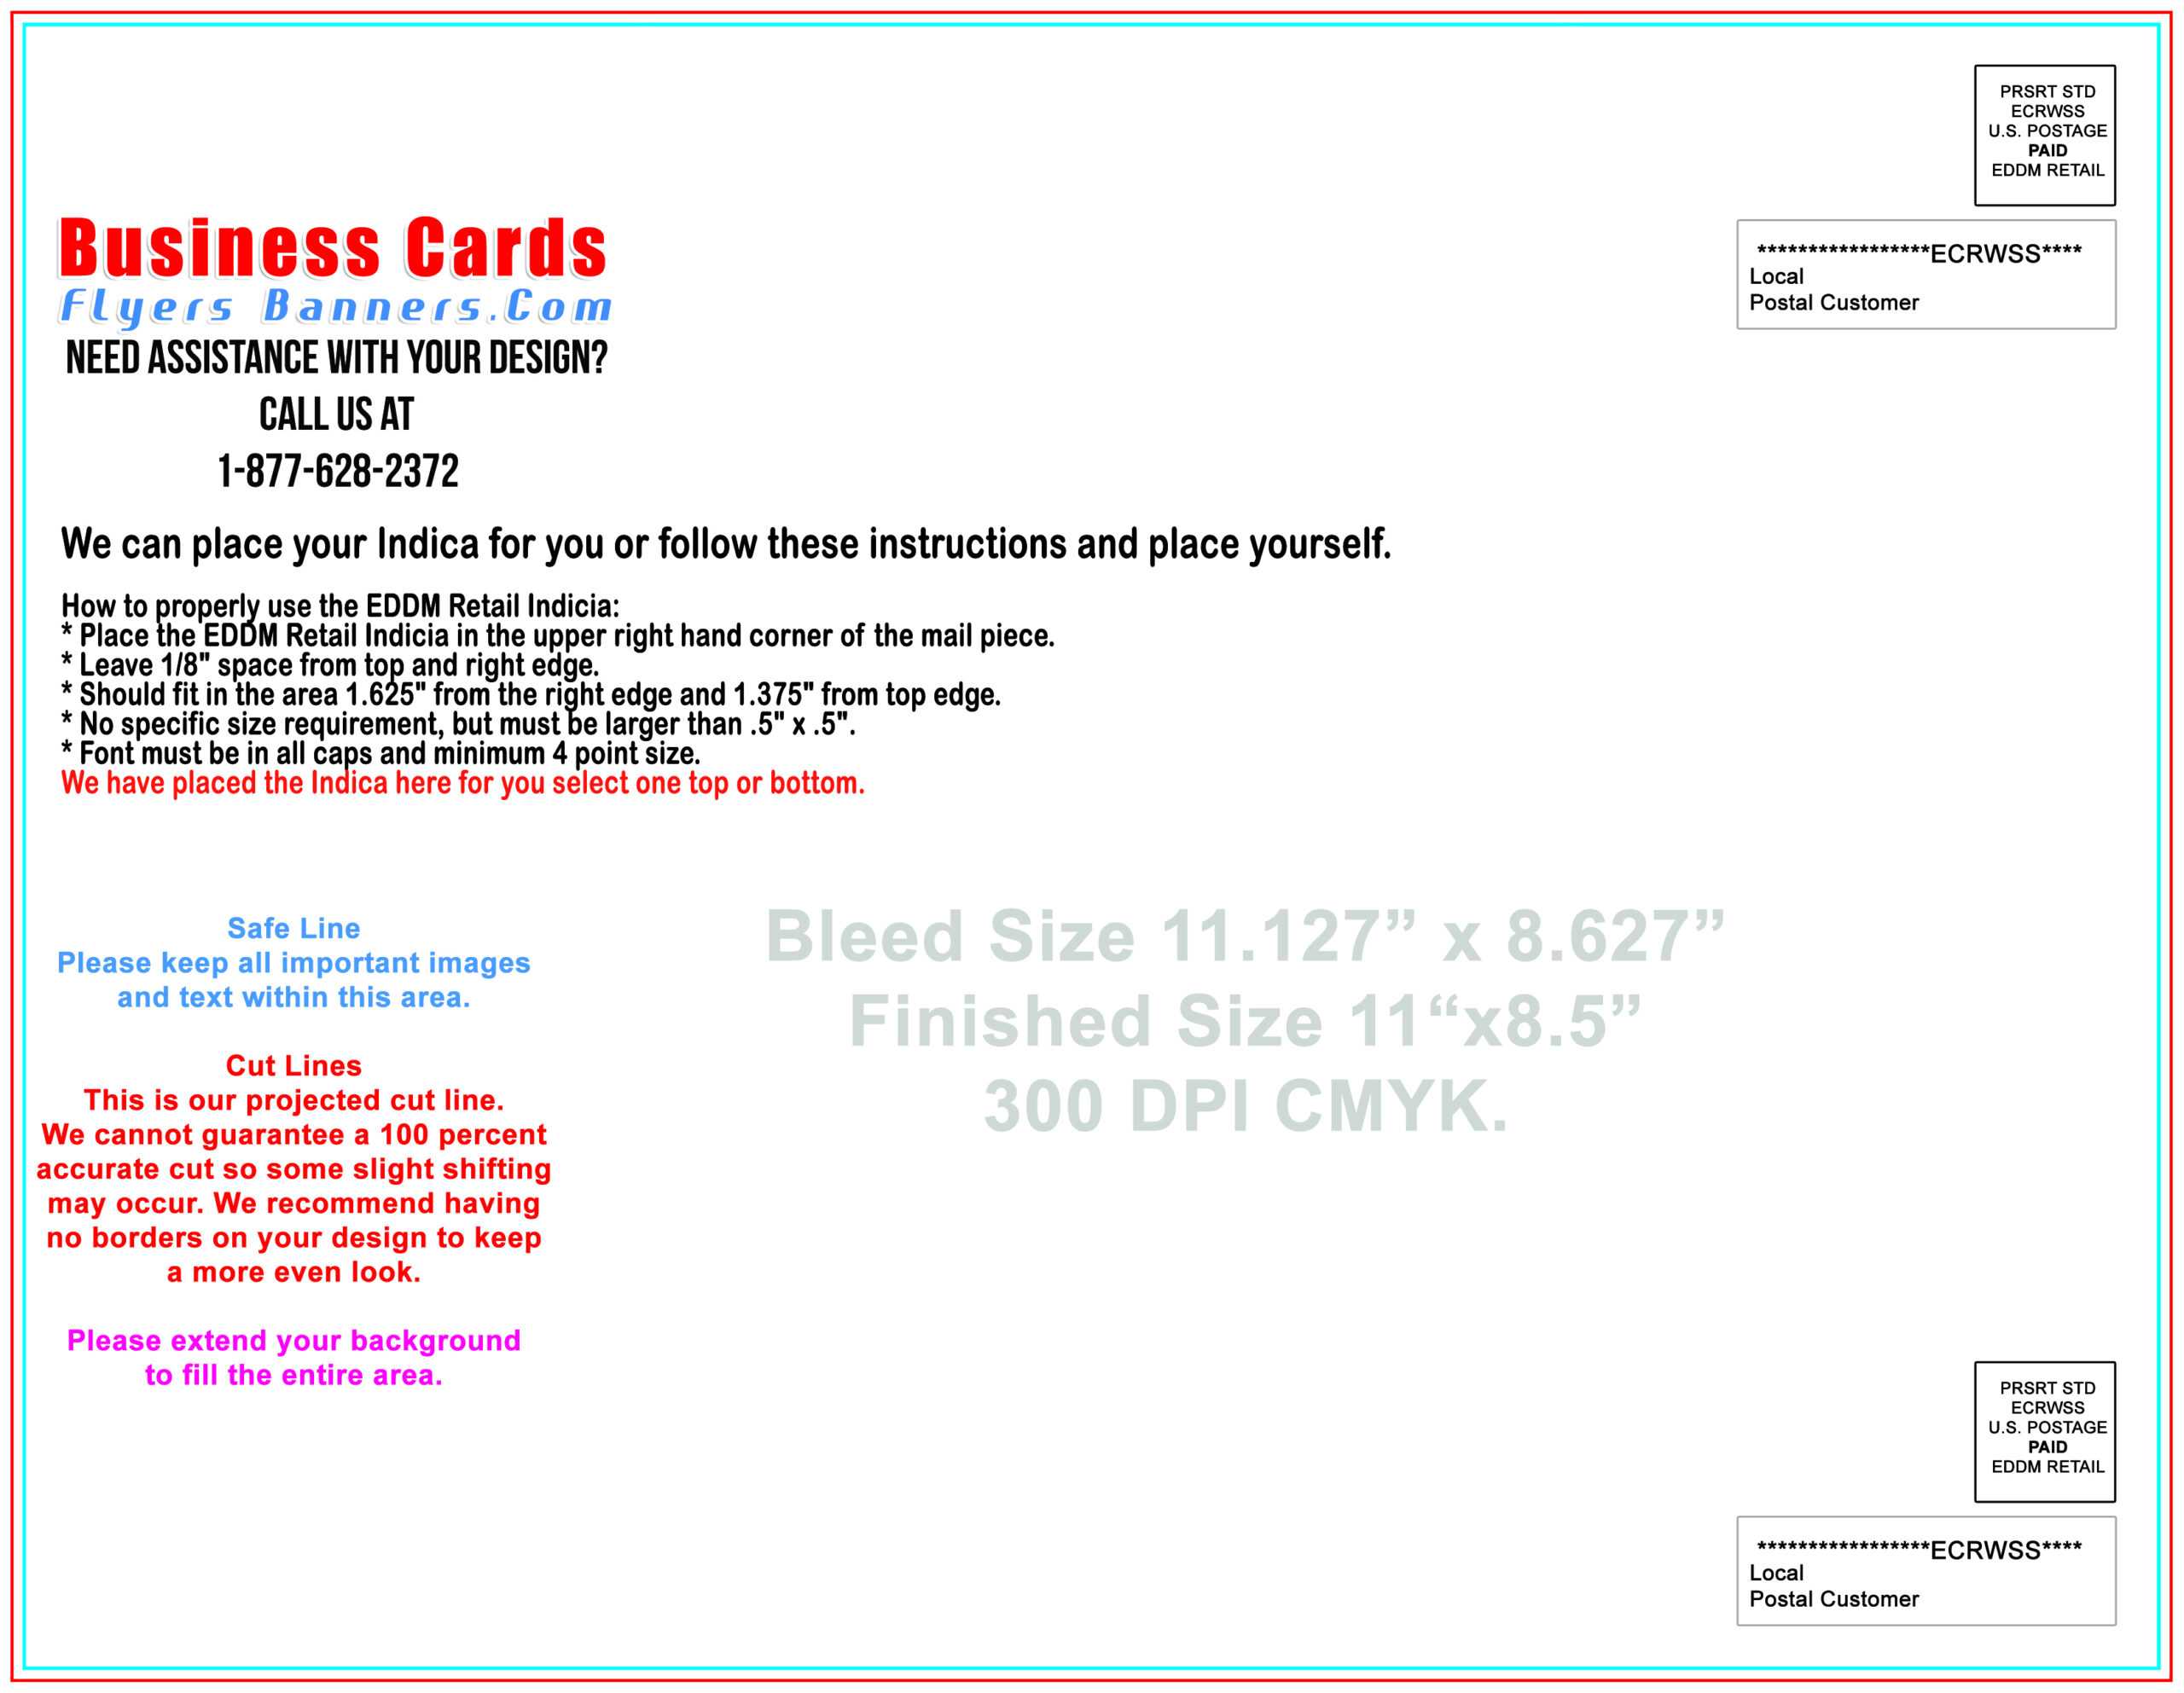 Eddm Postcard Templates - Free Shipping And Low Prices For Every Door Direct Mail Postcard Template